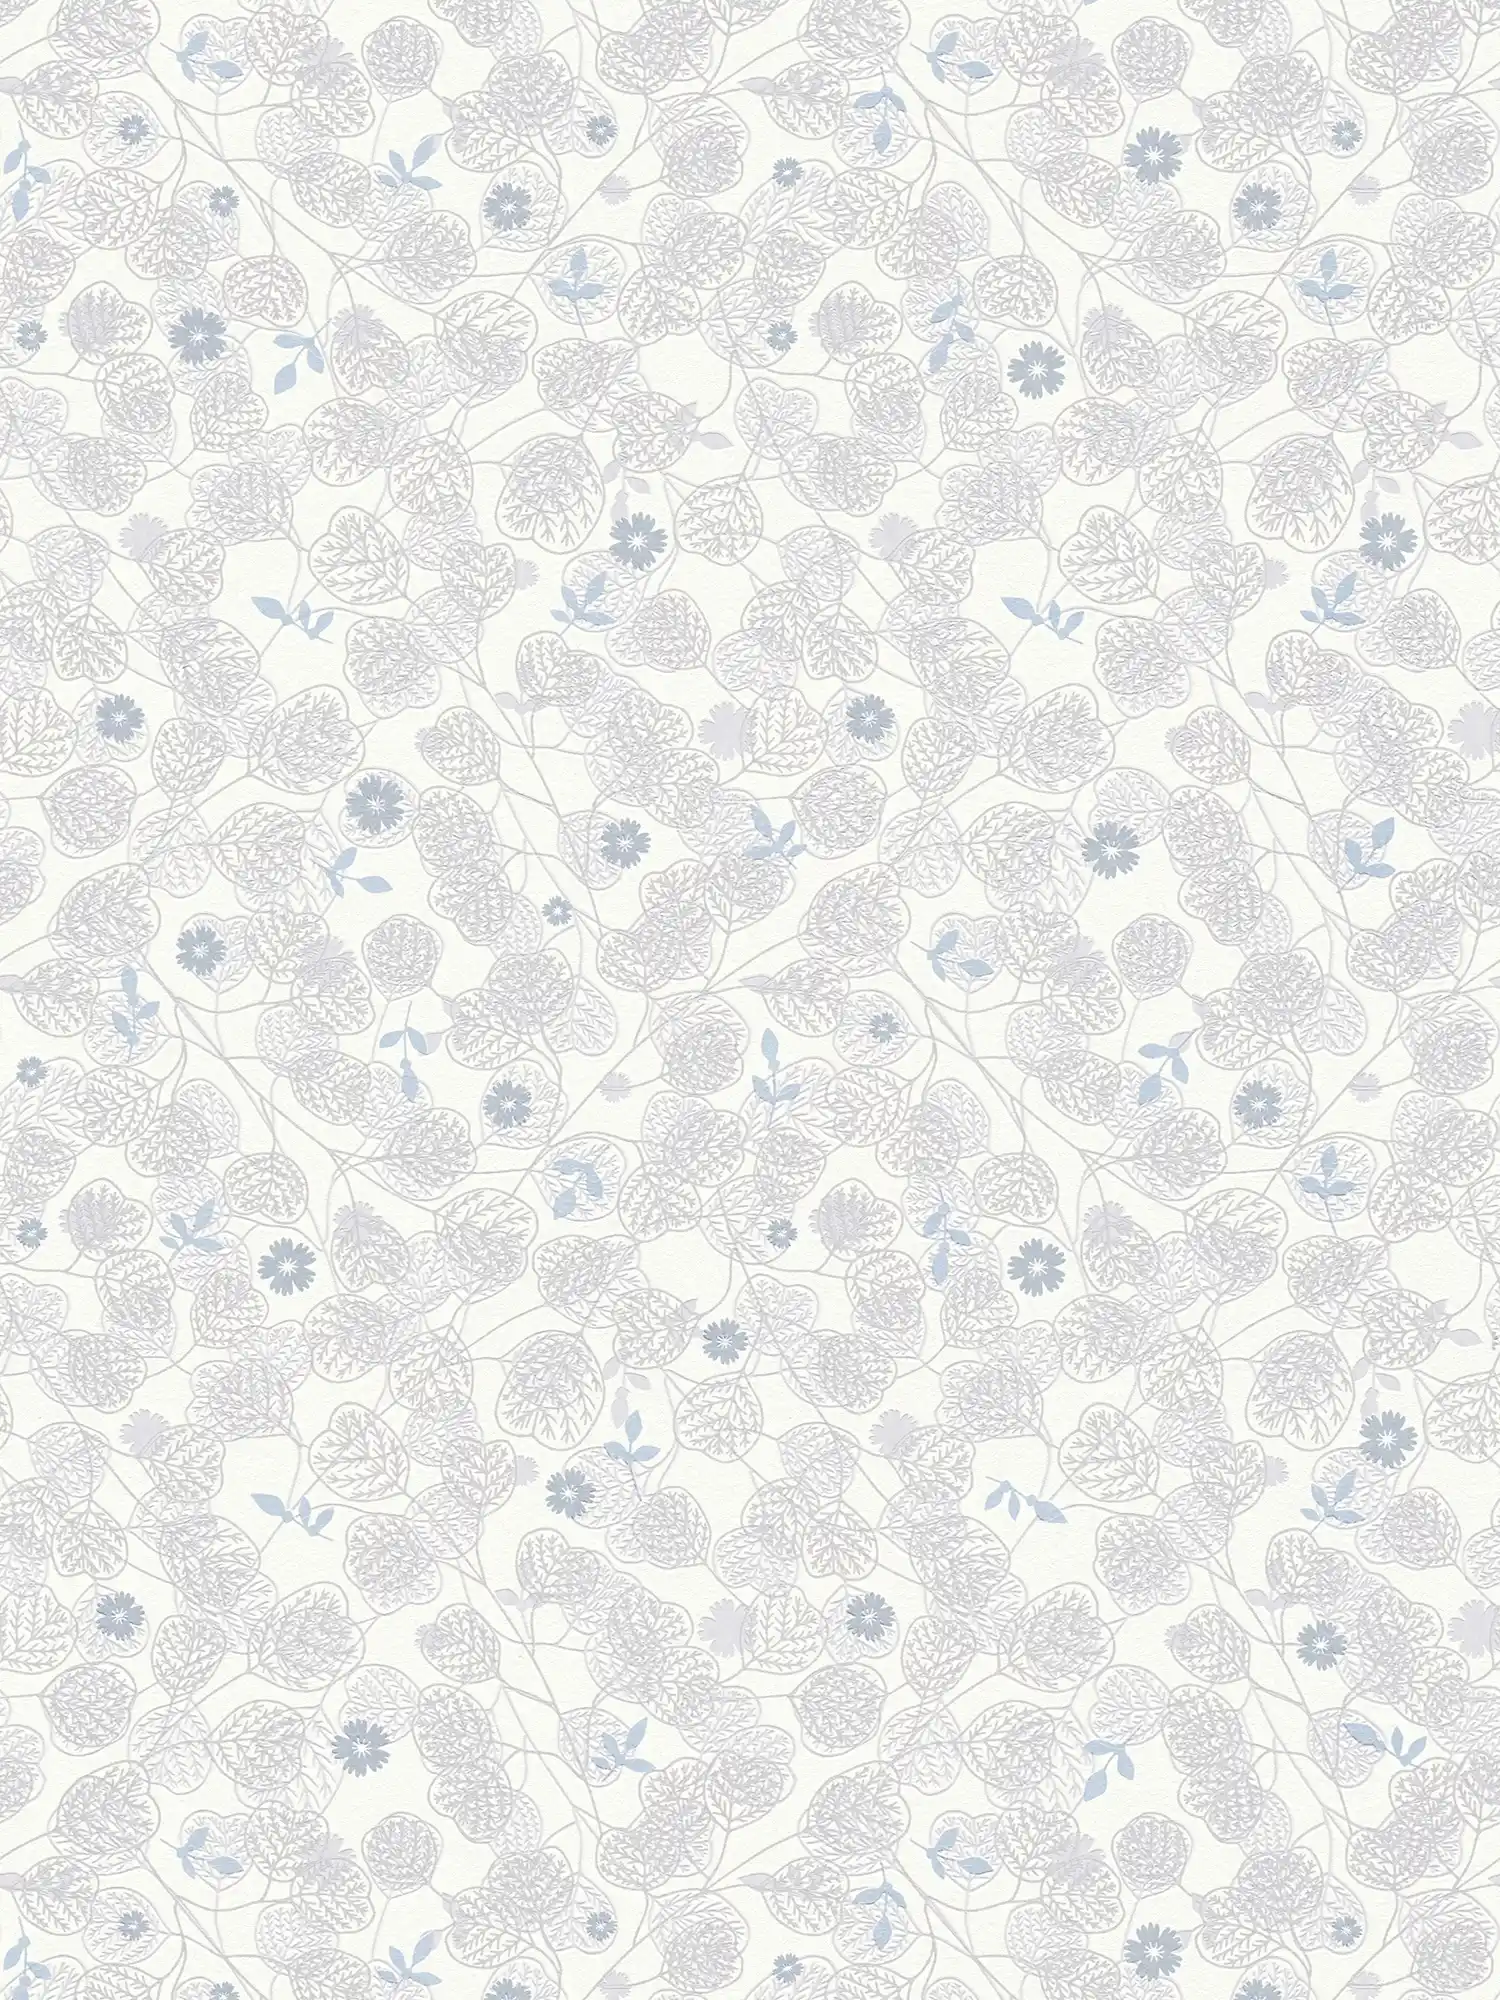 Floral wallpaper with subtle flowers & leaves - white, grey, blue
